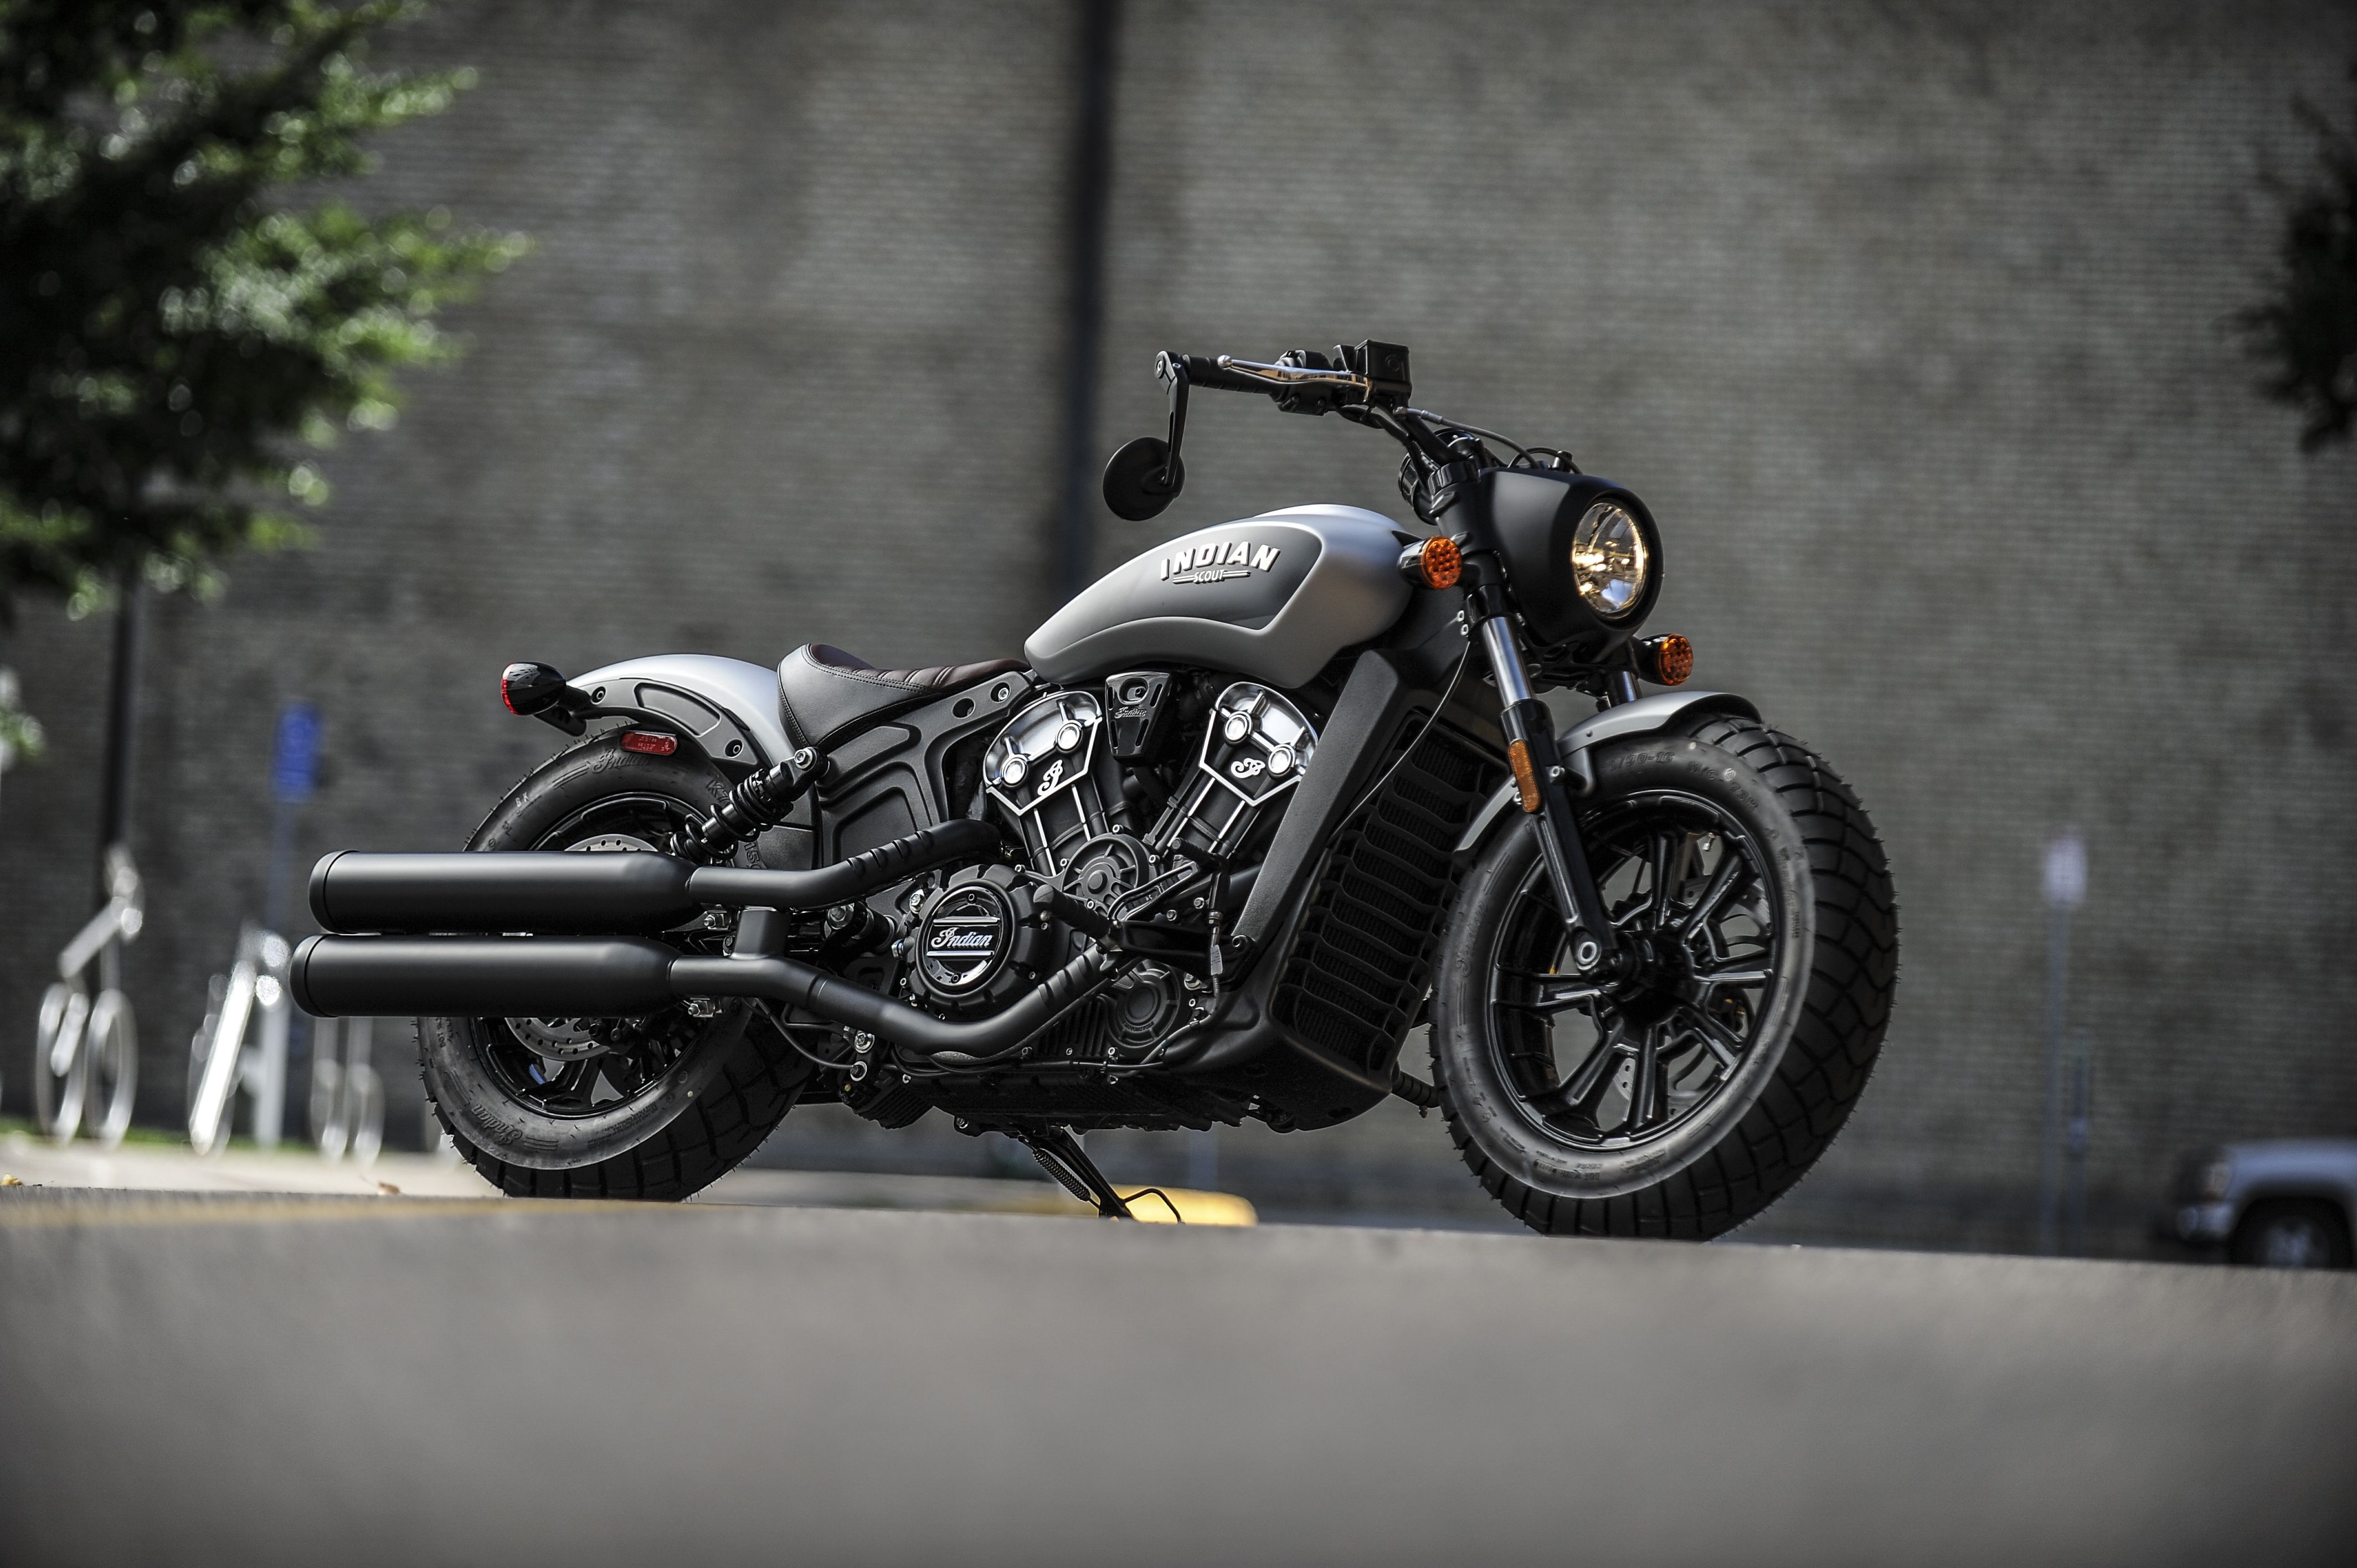 Indian Scout Bobber Wallpapers Wallpaper Cave